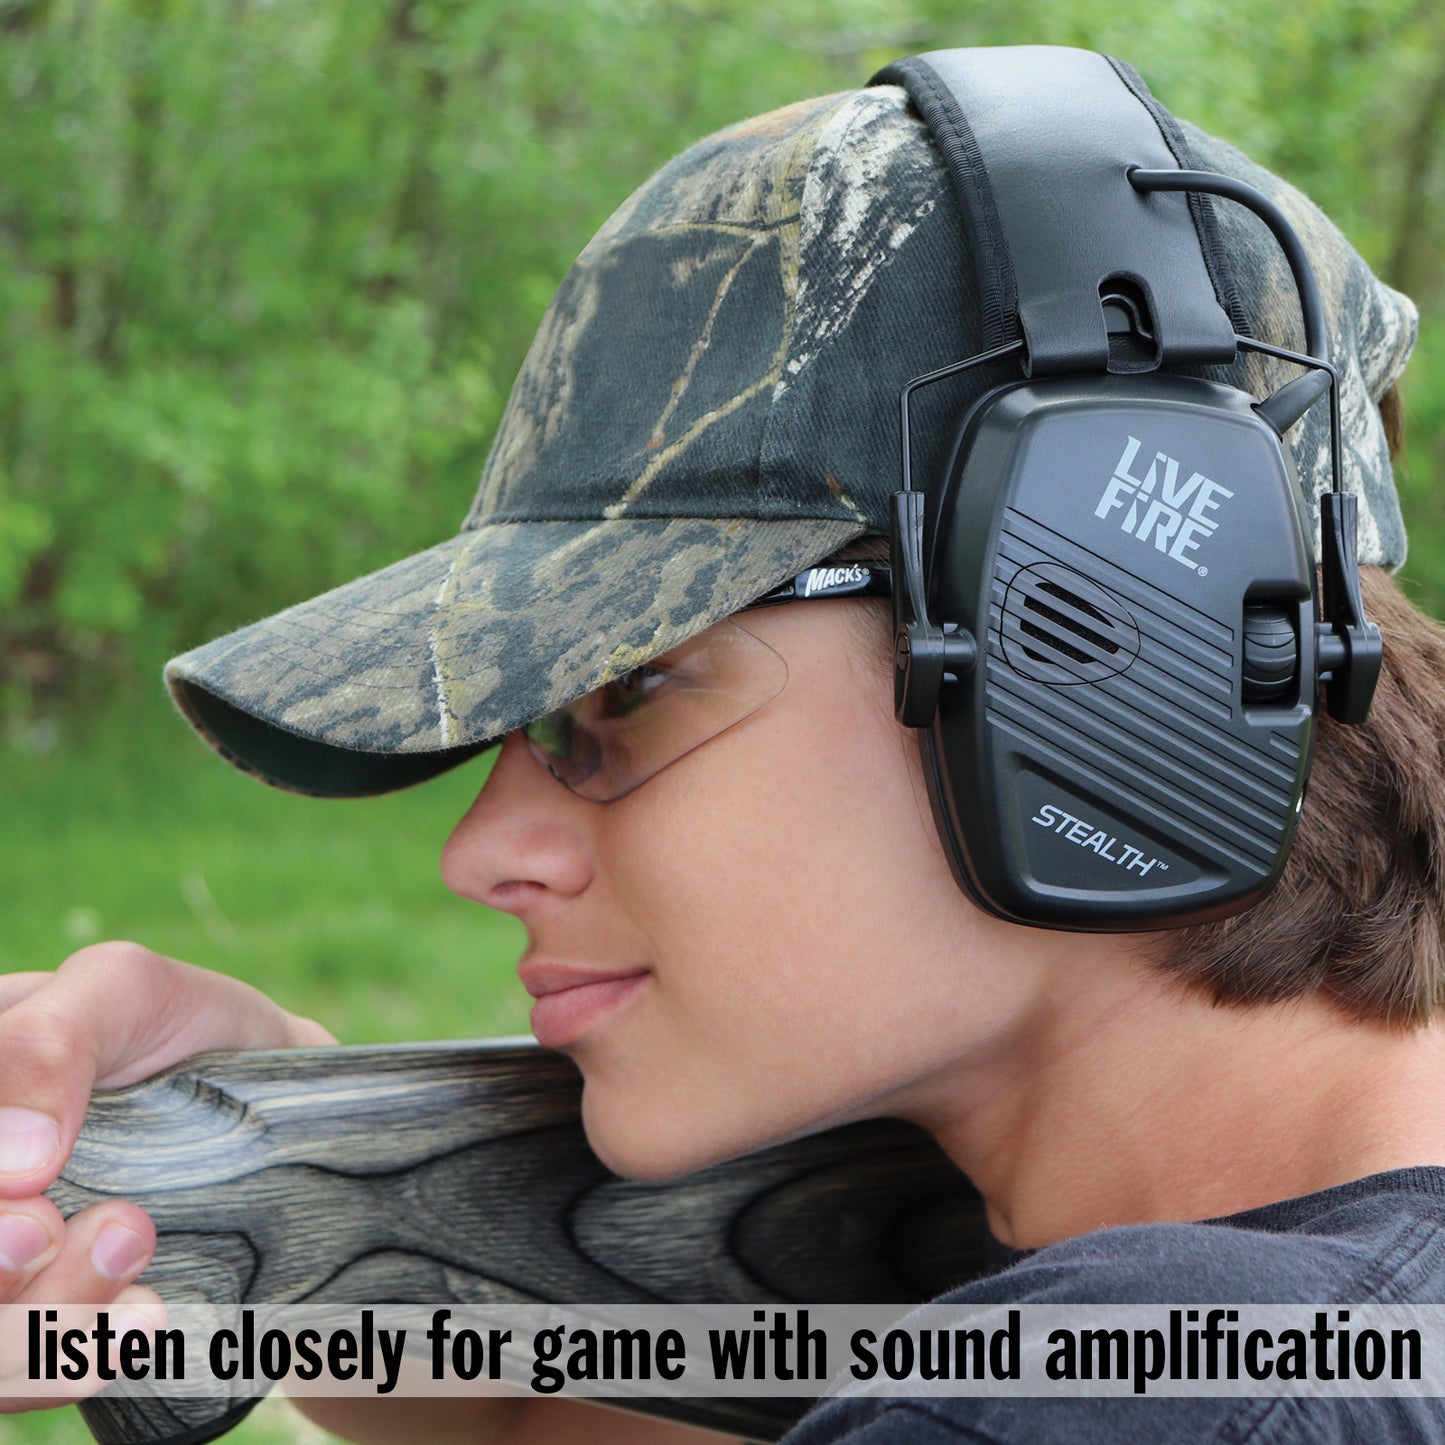 Live Fire® Stealth™ Electronic Shooting Earmuffs